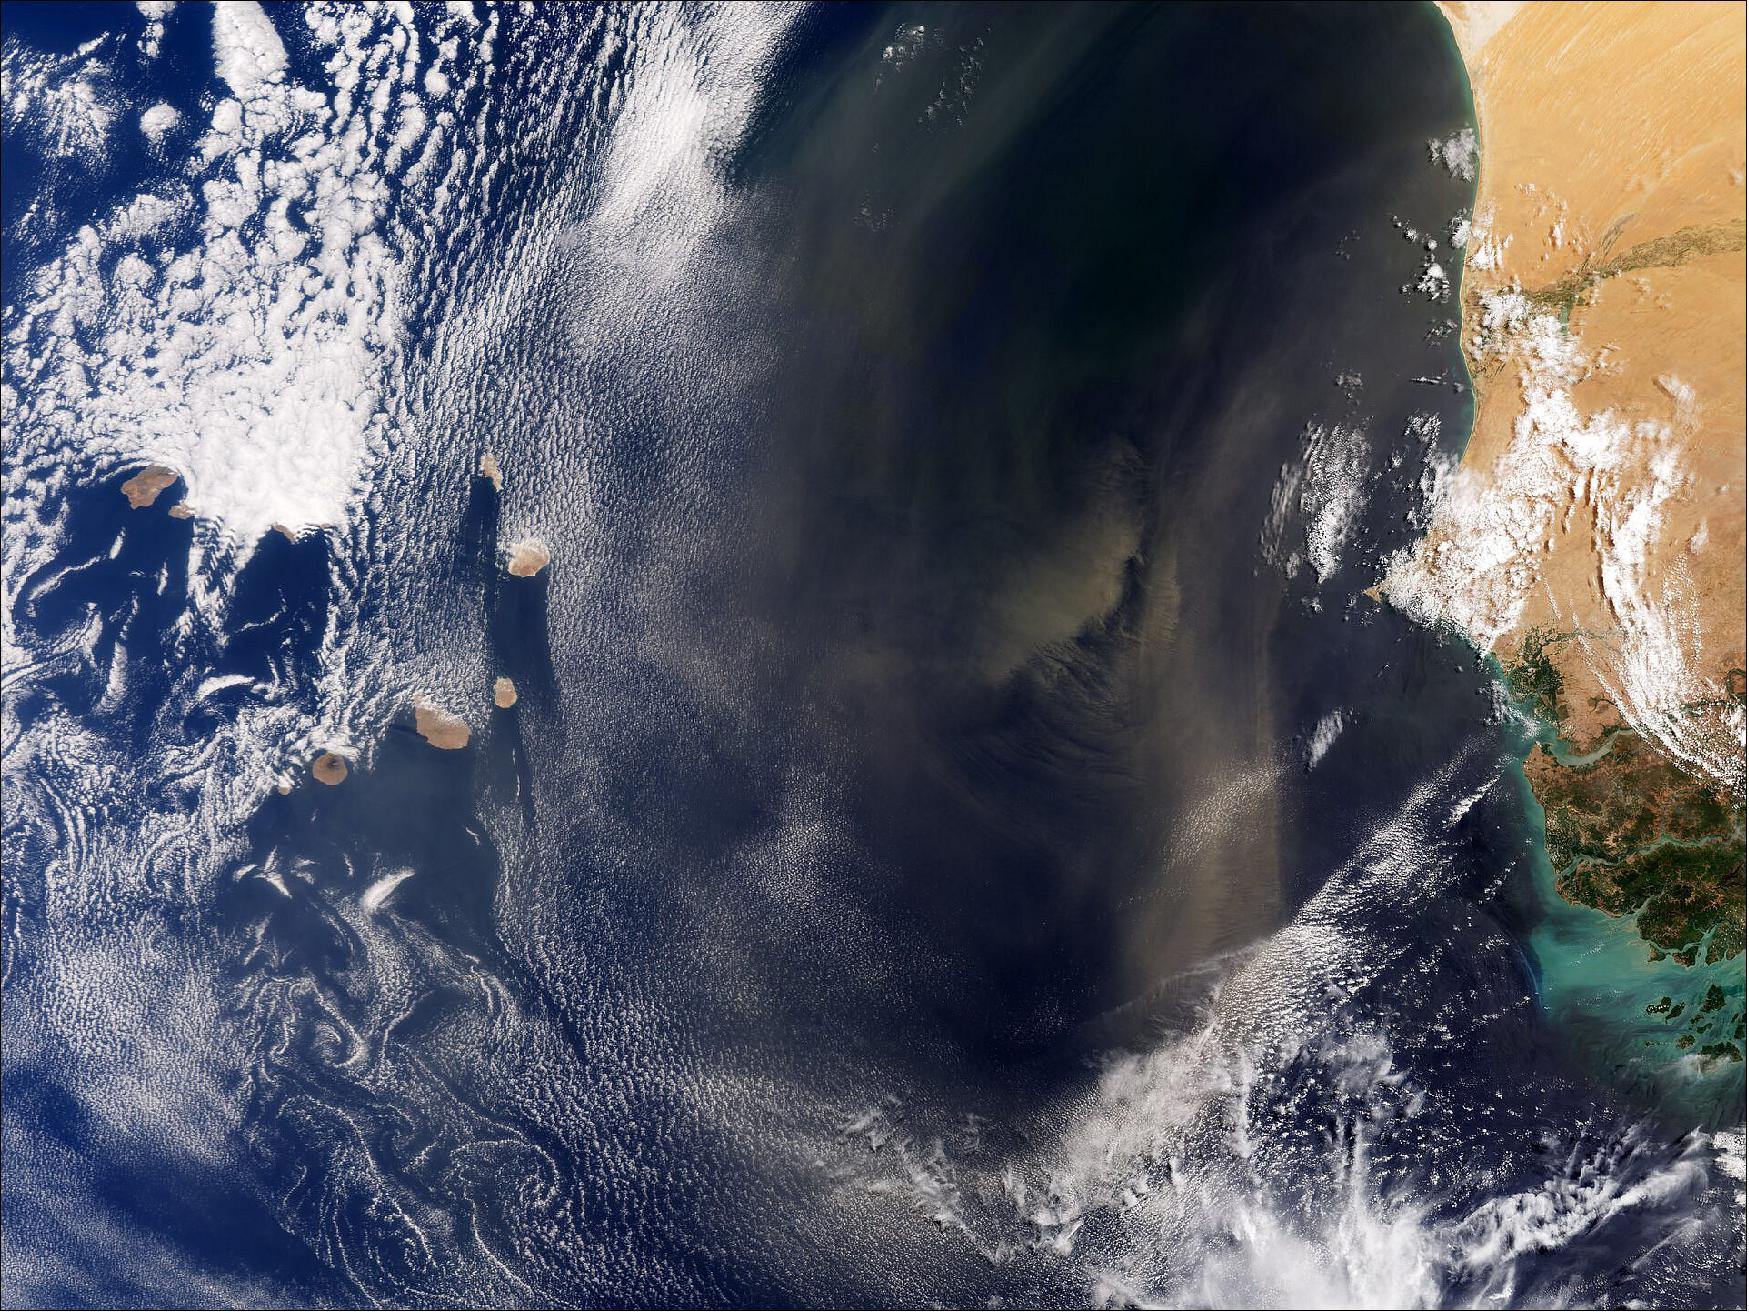 Figure 13: Desert dust blows from Africa. Captured by the Copernicus Sentinel-3 mission on 24 June 2021, this image shows desert dust blowing from the continent of Africa out across the Atlantic Ocean. Several of the small islands that make up the archipelago of Cabo Verde can be seen peeking out from beneath the clouds. These volcanic islands lie in the Atlantic Ocean about 570 km off the west coast of Senegal and Mauritania, which frame the image on the right. The sand comes mainly from the Sahara and Sahel region. Owing to Cabo Verde's position and the trade winds, these storms are not uncommon. - During September 2021, Cabo Verde is the site of an extensive field campaign to validate data from ESA's Aeolus wind mission (image credit: ESA, the image contains modified Copernicus Sentinel-3 data (2021), processed by ESA, CC BY-SA 3.0 IGO)